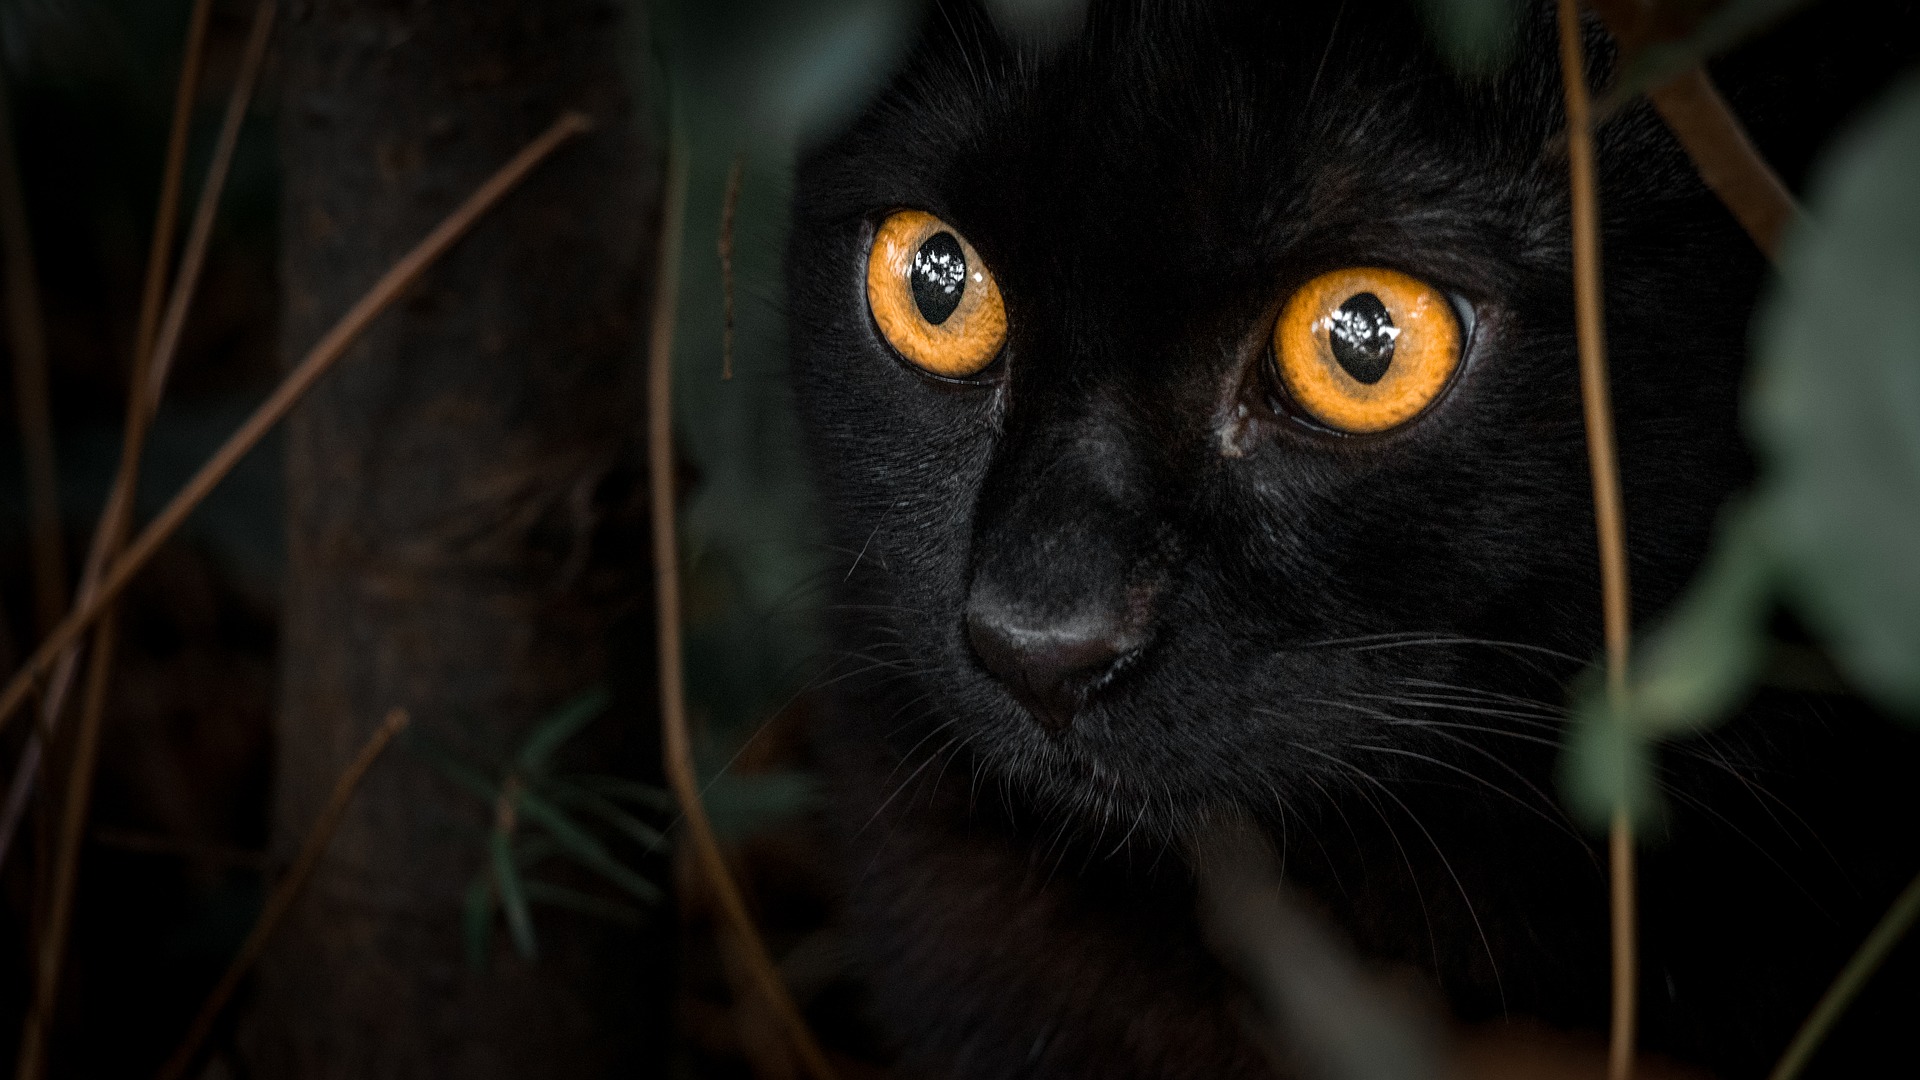 An image of a black cat